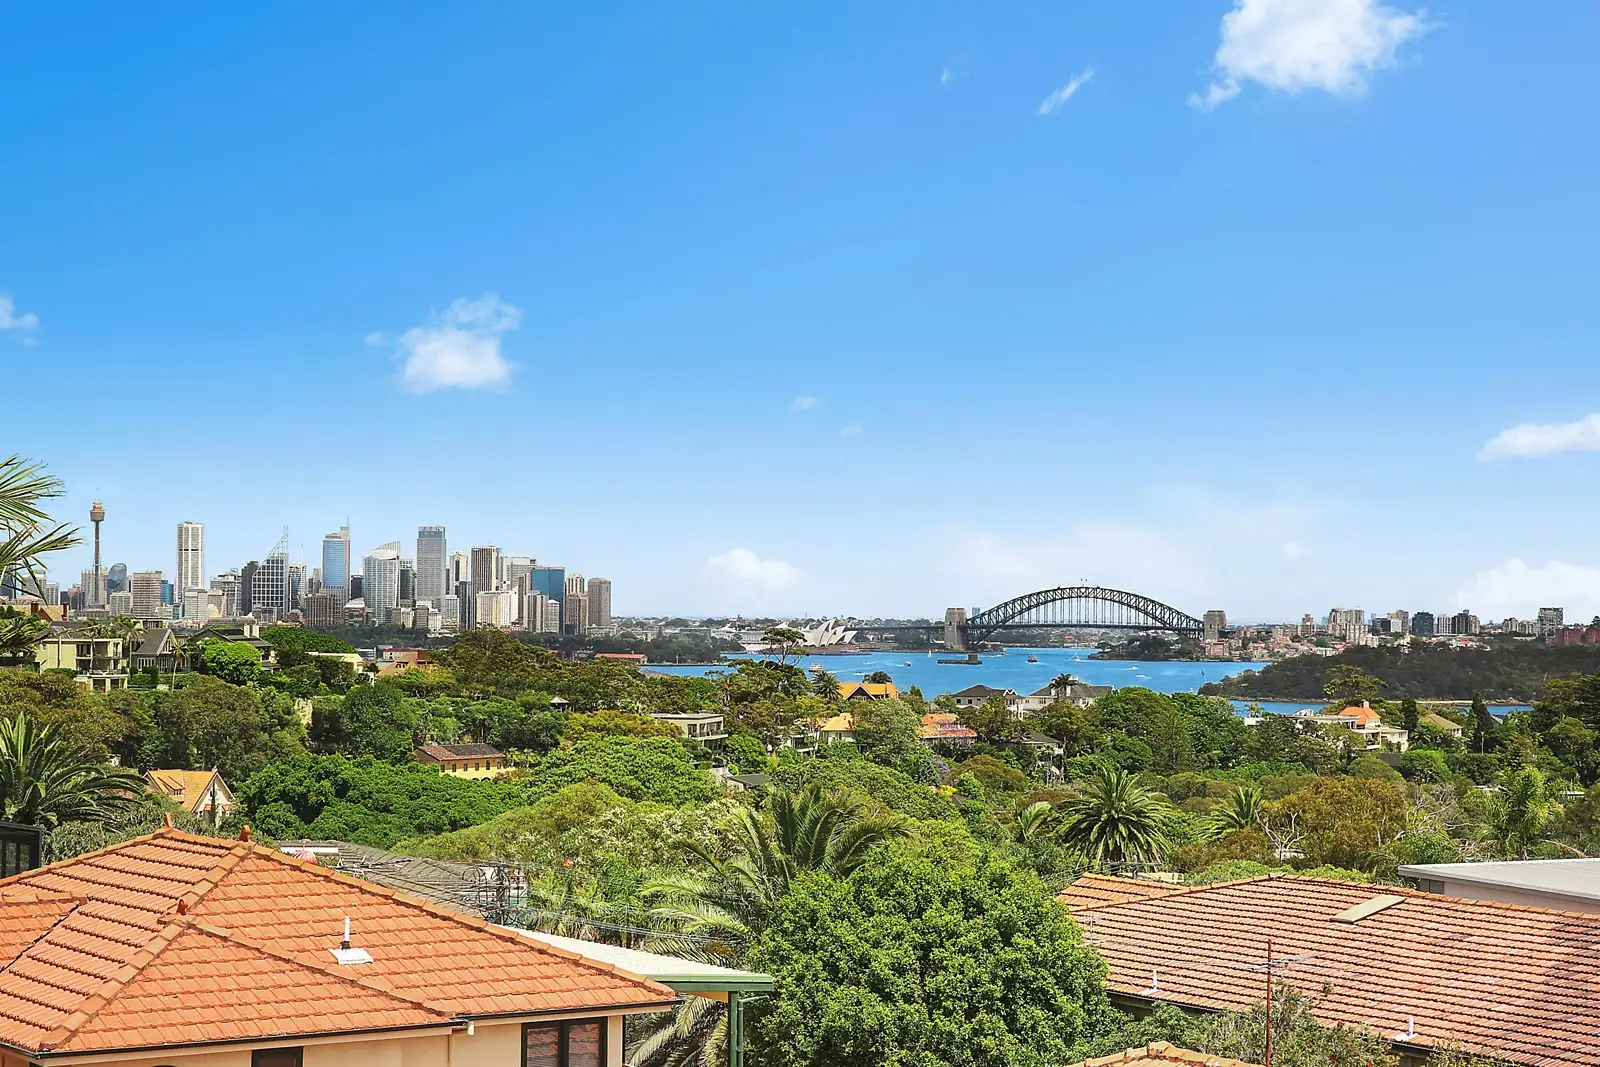 Photo #2: 2 Village Lower Road, Vaucluse - Sold by Sydney Sotheby's International Realty